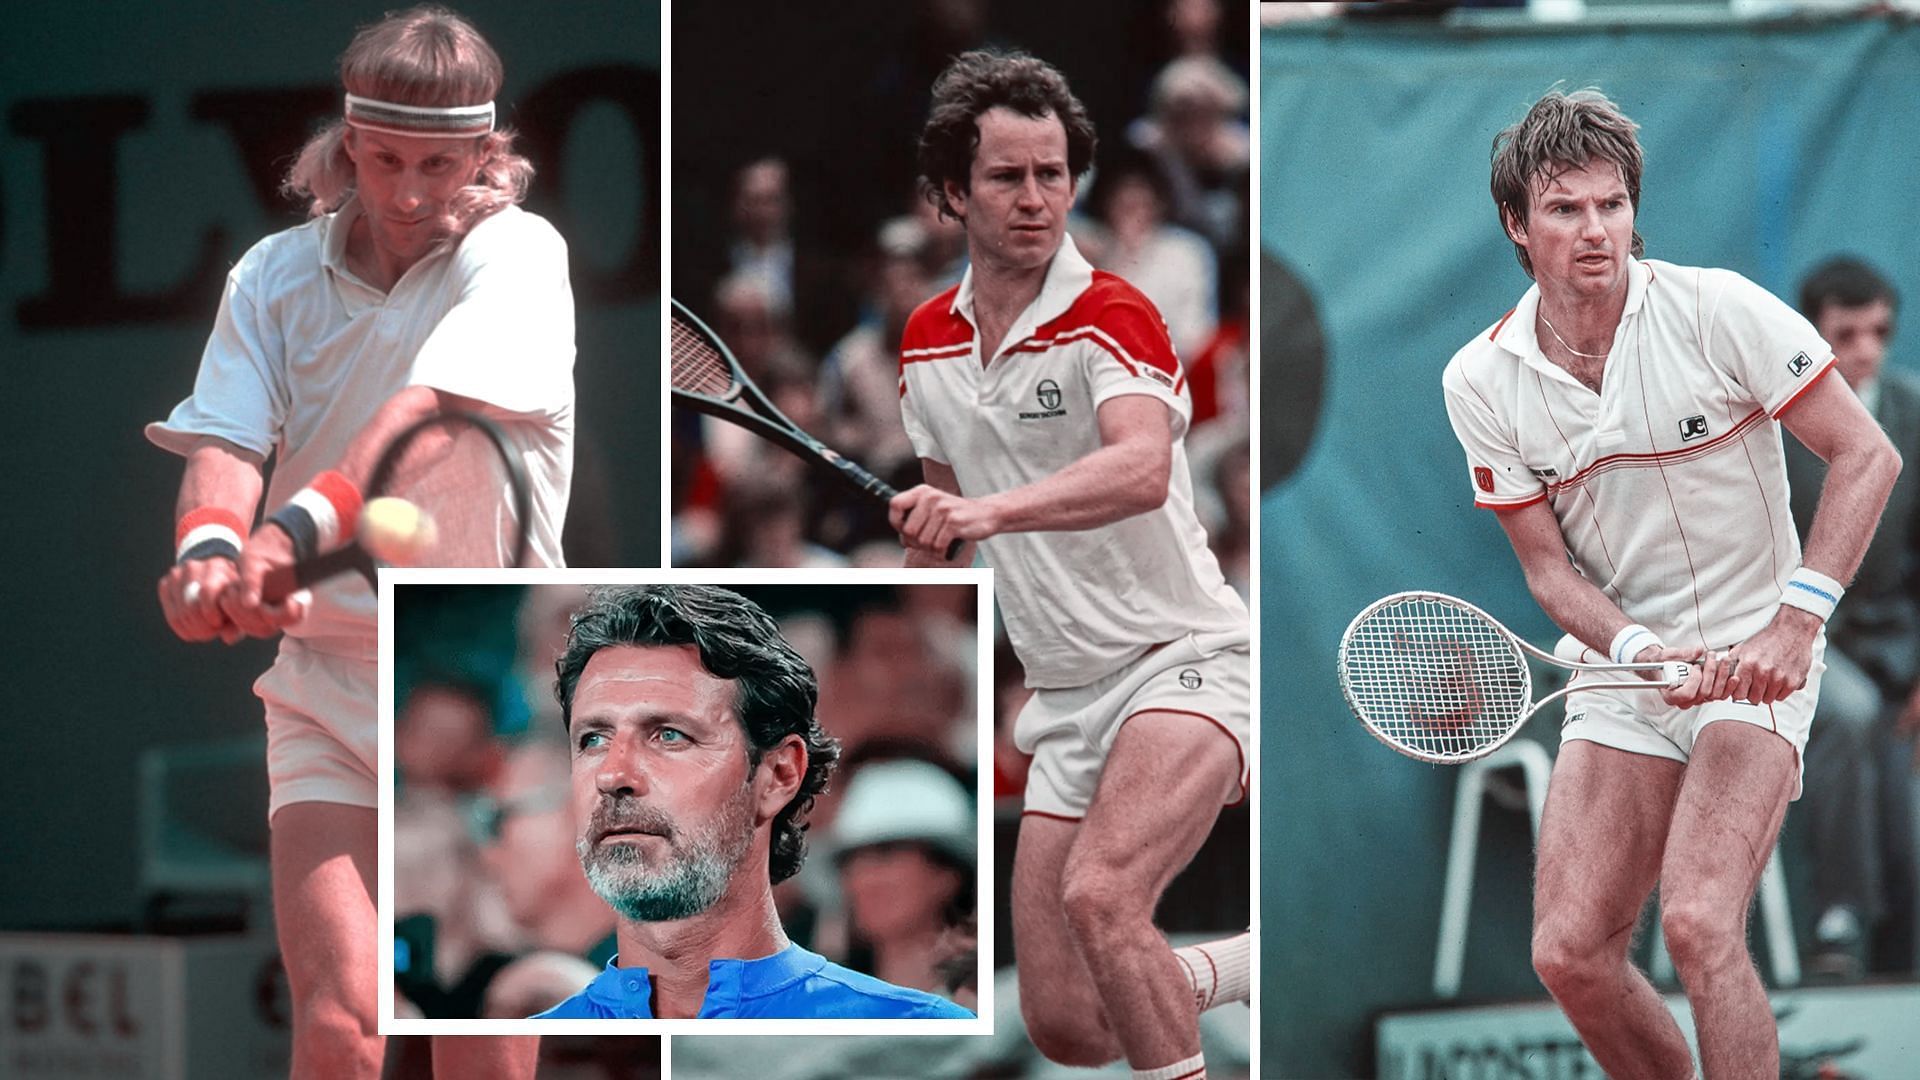 Patrick Mouratoglou picked features of John McEnroe, Bjorn Borg and Jimmy Connors while picking his best players from the 1980s